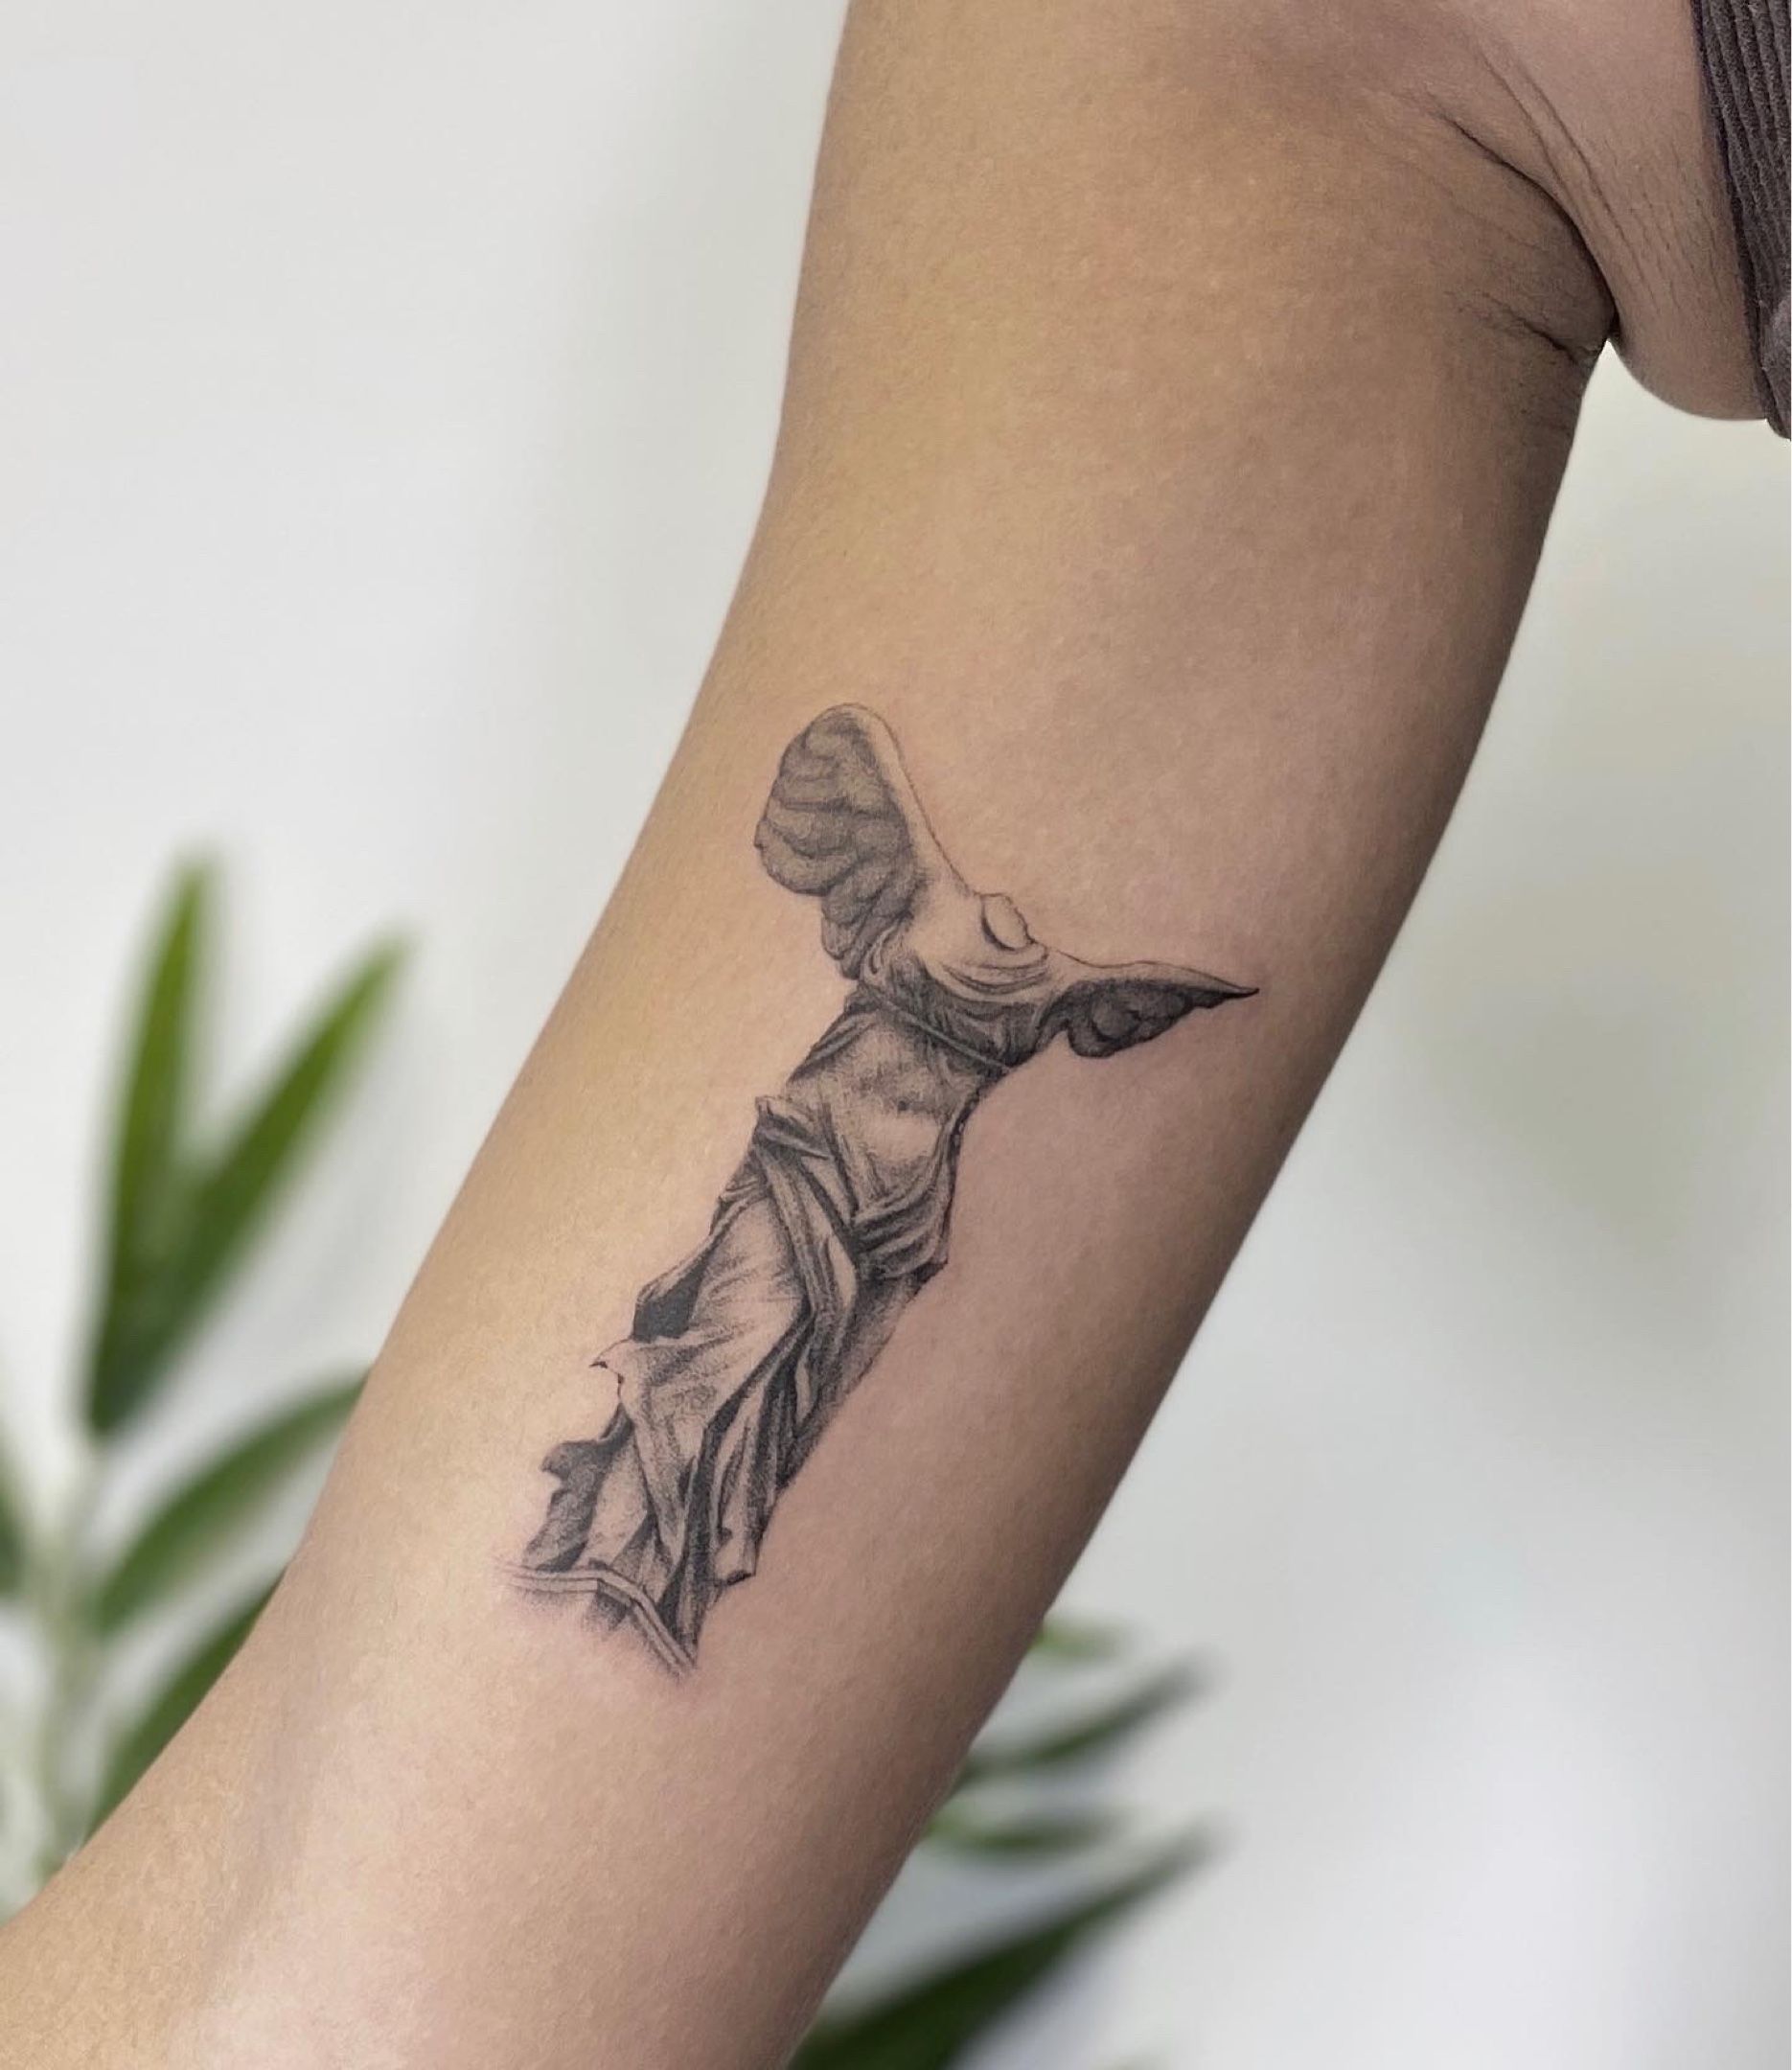 80 Powerful Angel Michael Tattoo Designs with Meaning | Art and Design